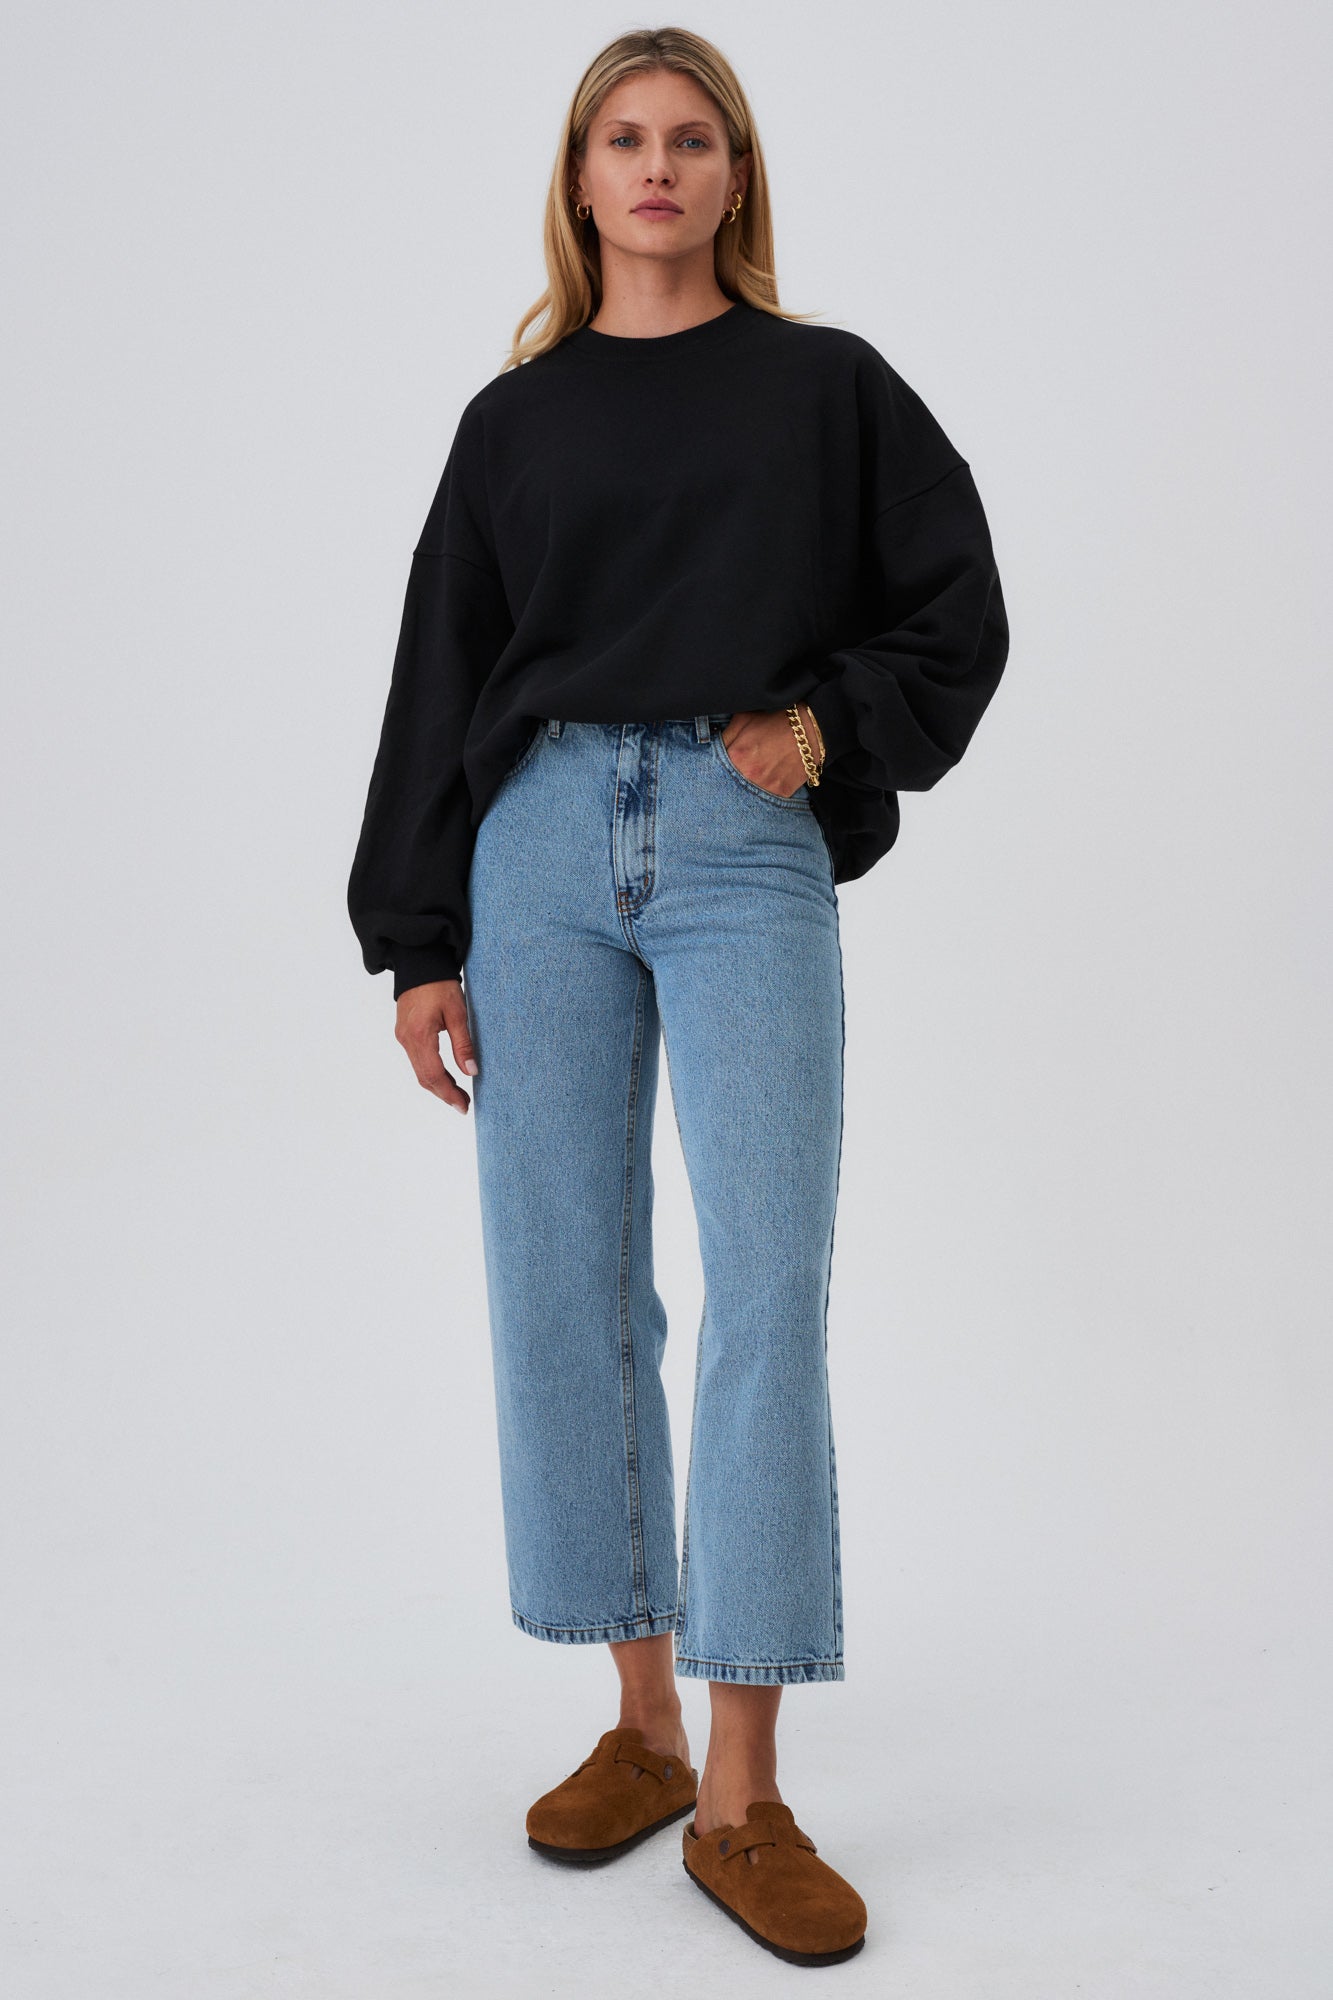 Sweatshirt in organic cotton / 17 / 12 / onyx black *cropped-jeans-from-recycled-cotton-05-12-light-indigo* ?The model is 177cm tall and wears size XS/S? |